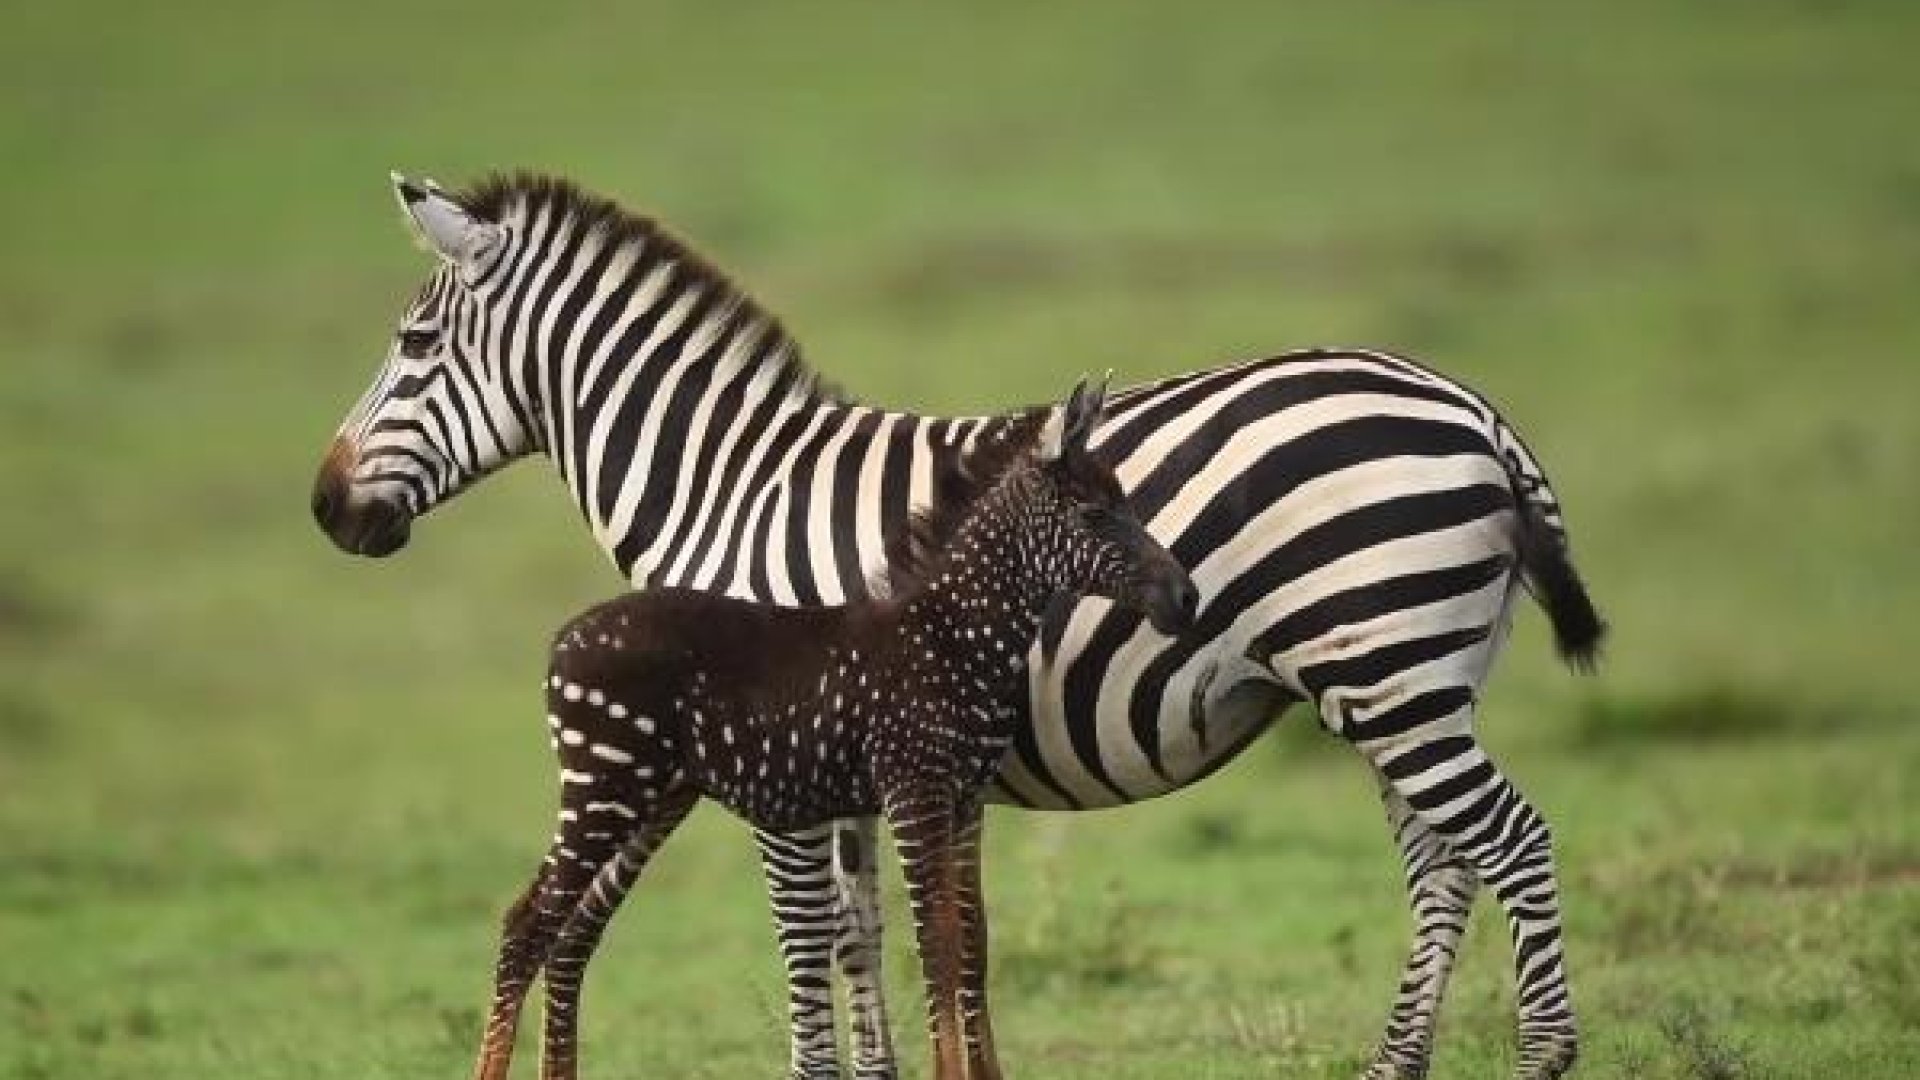 Rare Polka Dotted Zebra Foal “spotted” In Kenya Brightvibes 9643